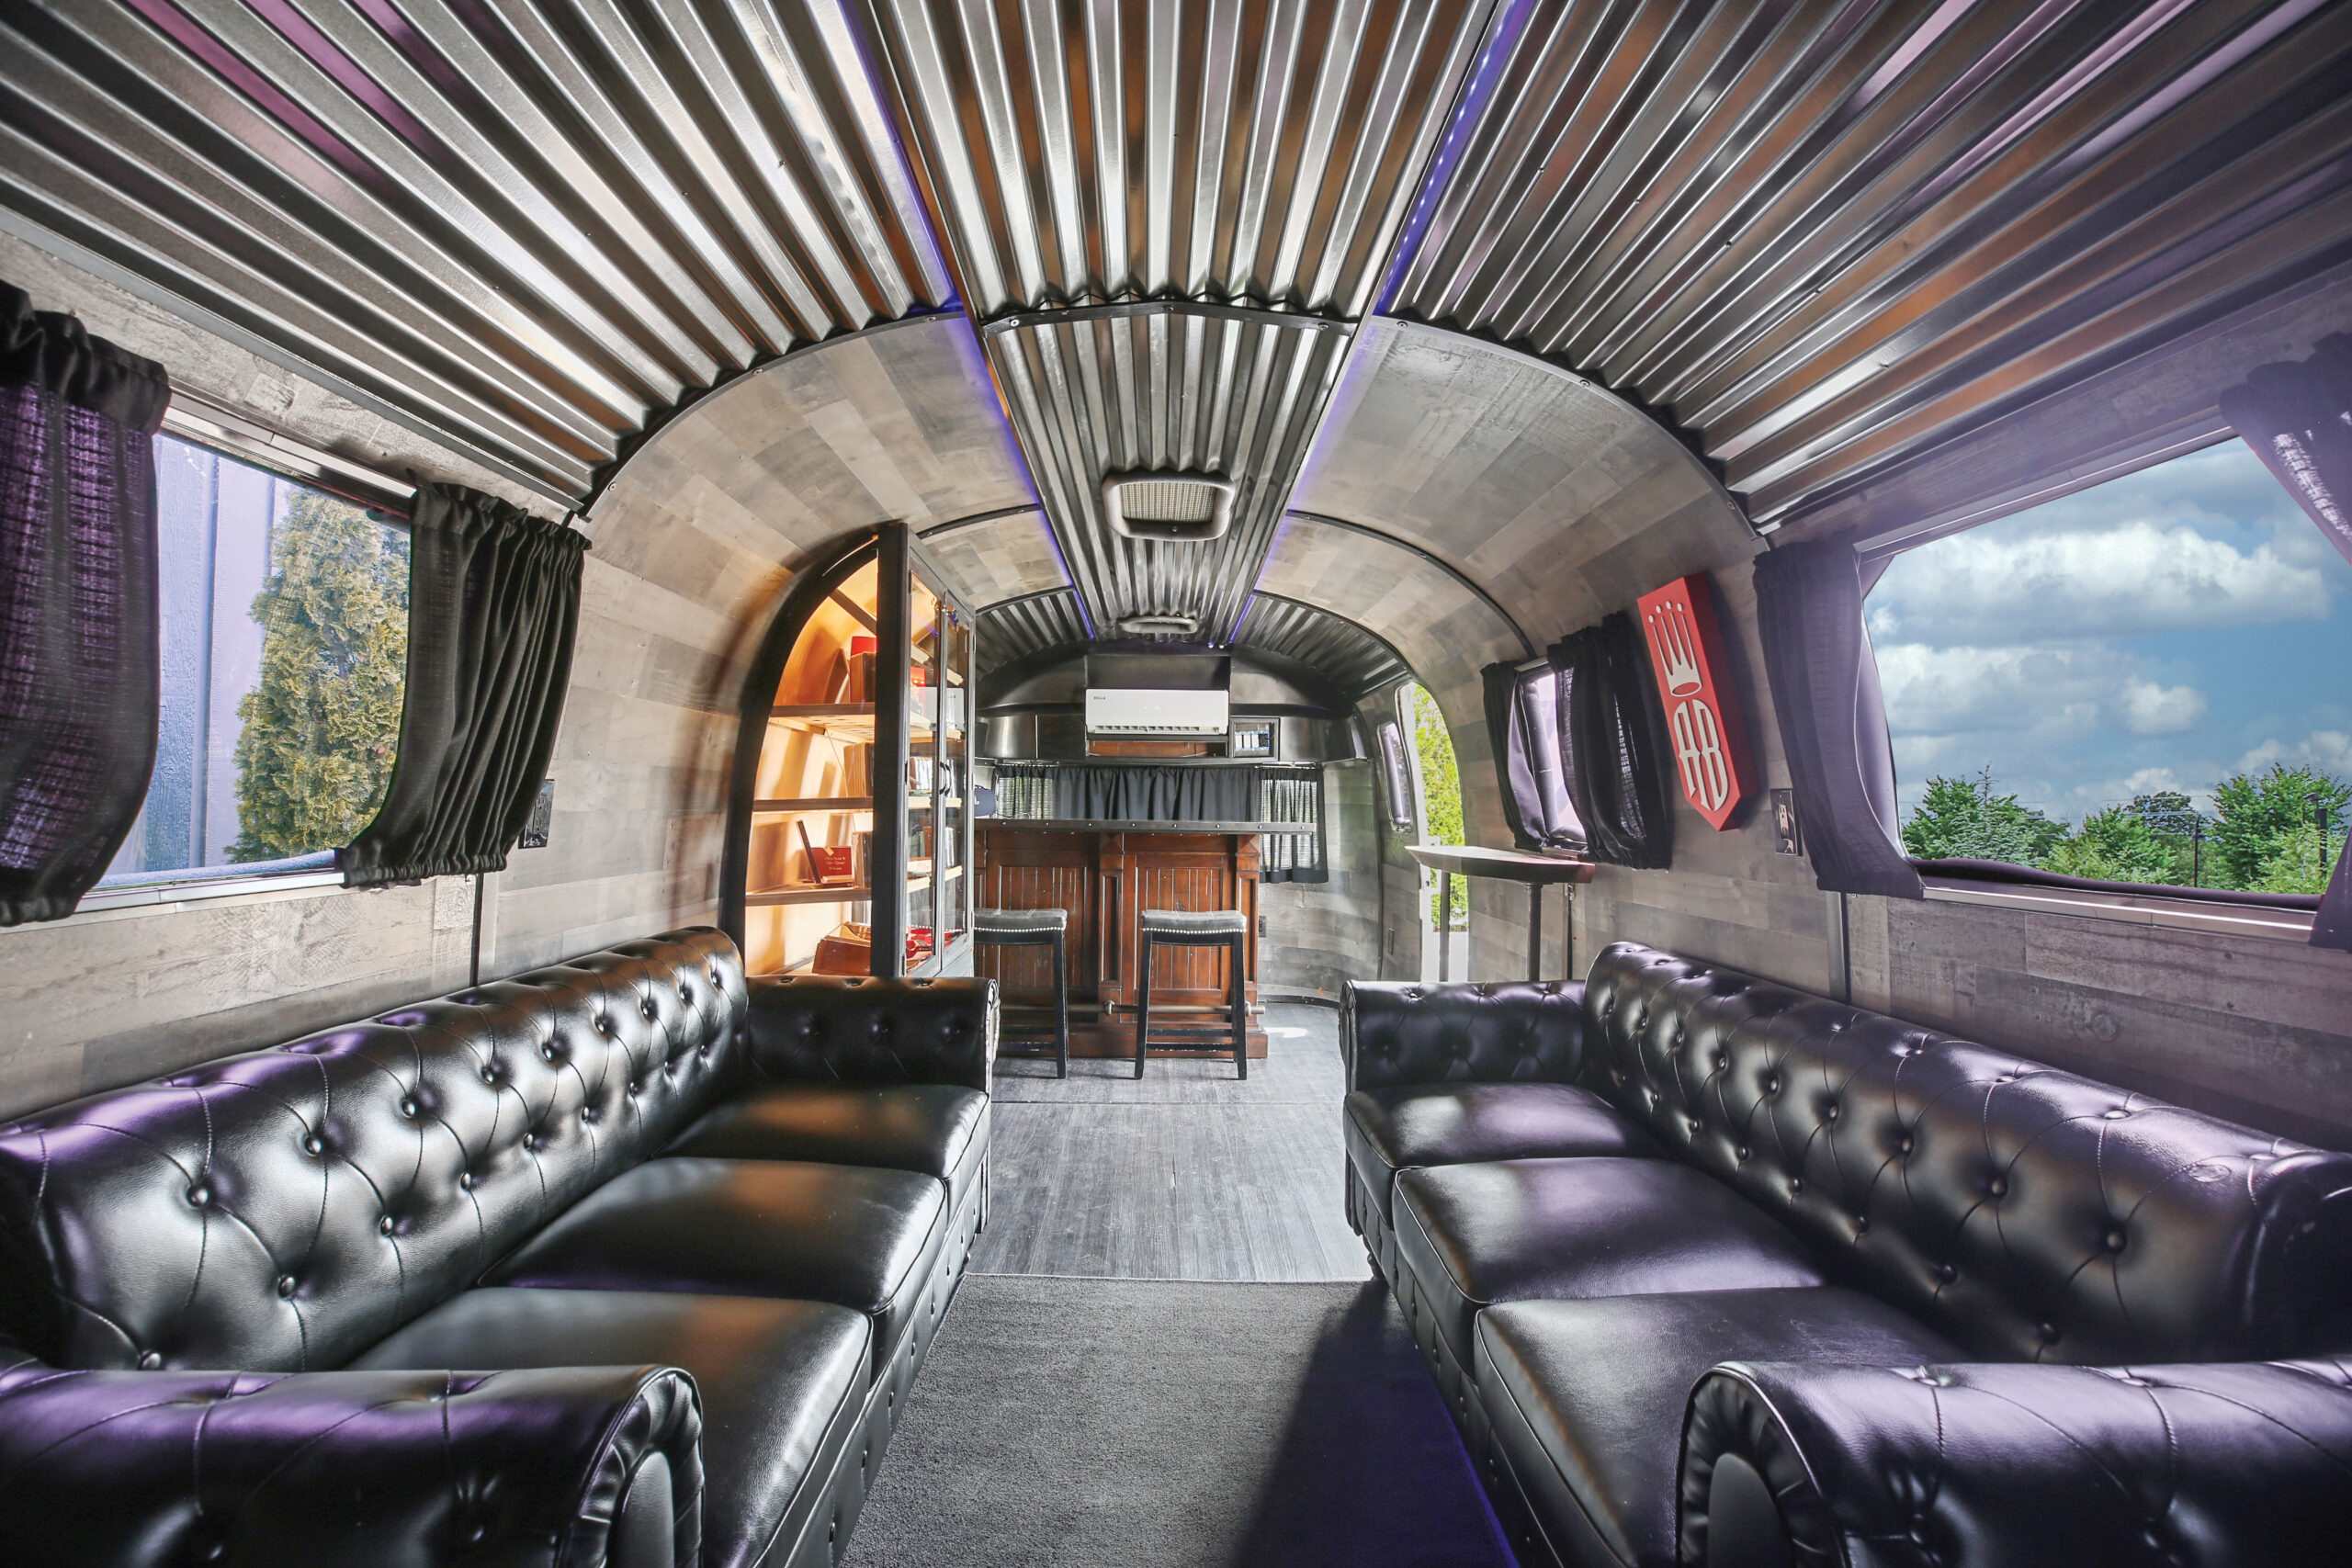 The Airstream cigar lounge is the perfect place for the groom to relax before their wedding.